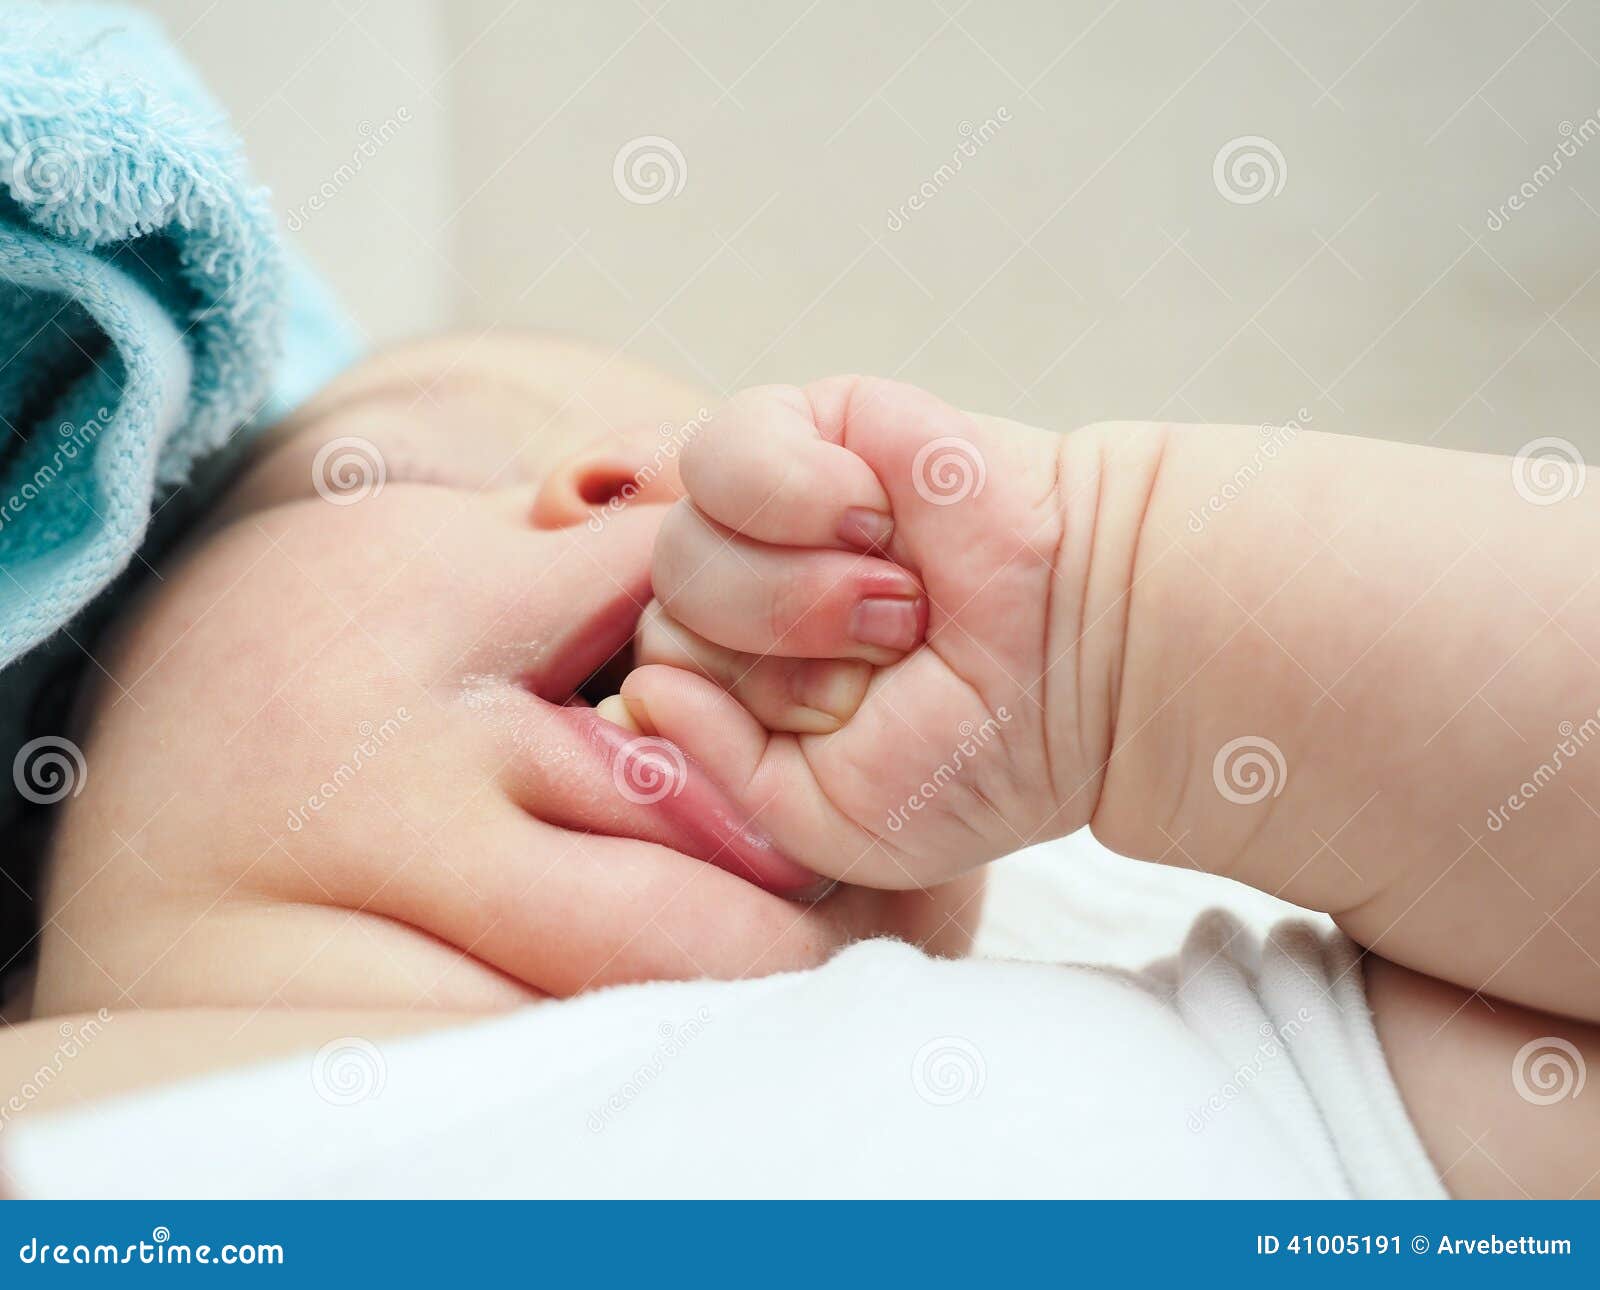 Baby chewing on hand stock image. Image of fist, close ...